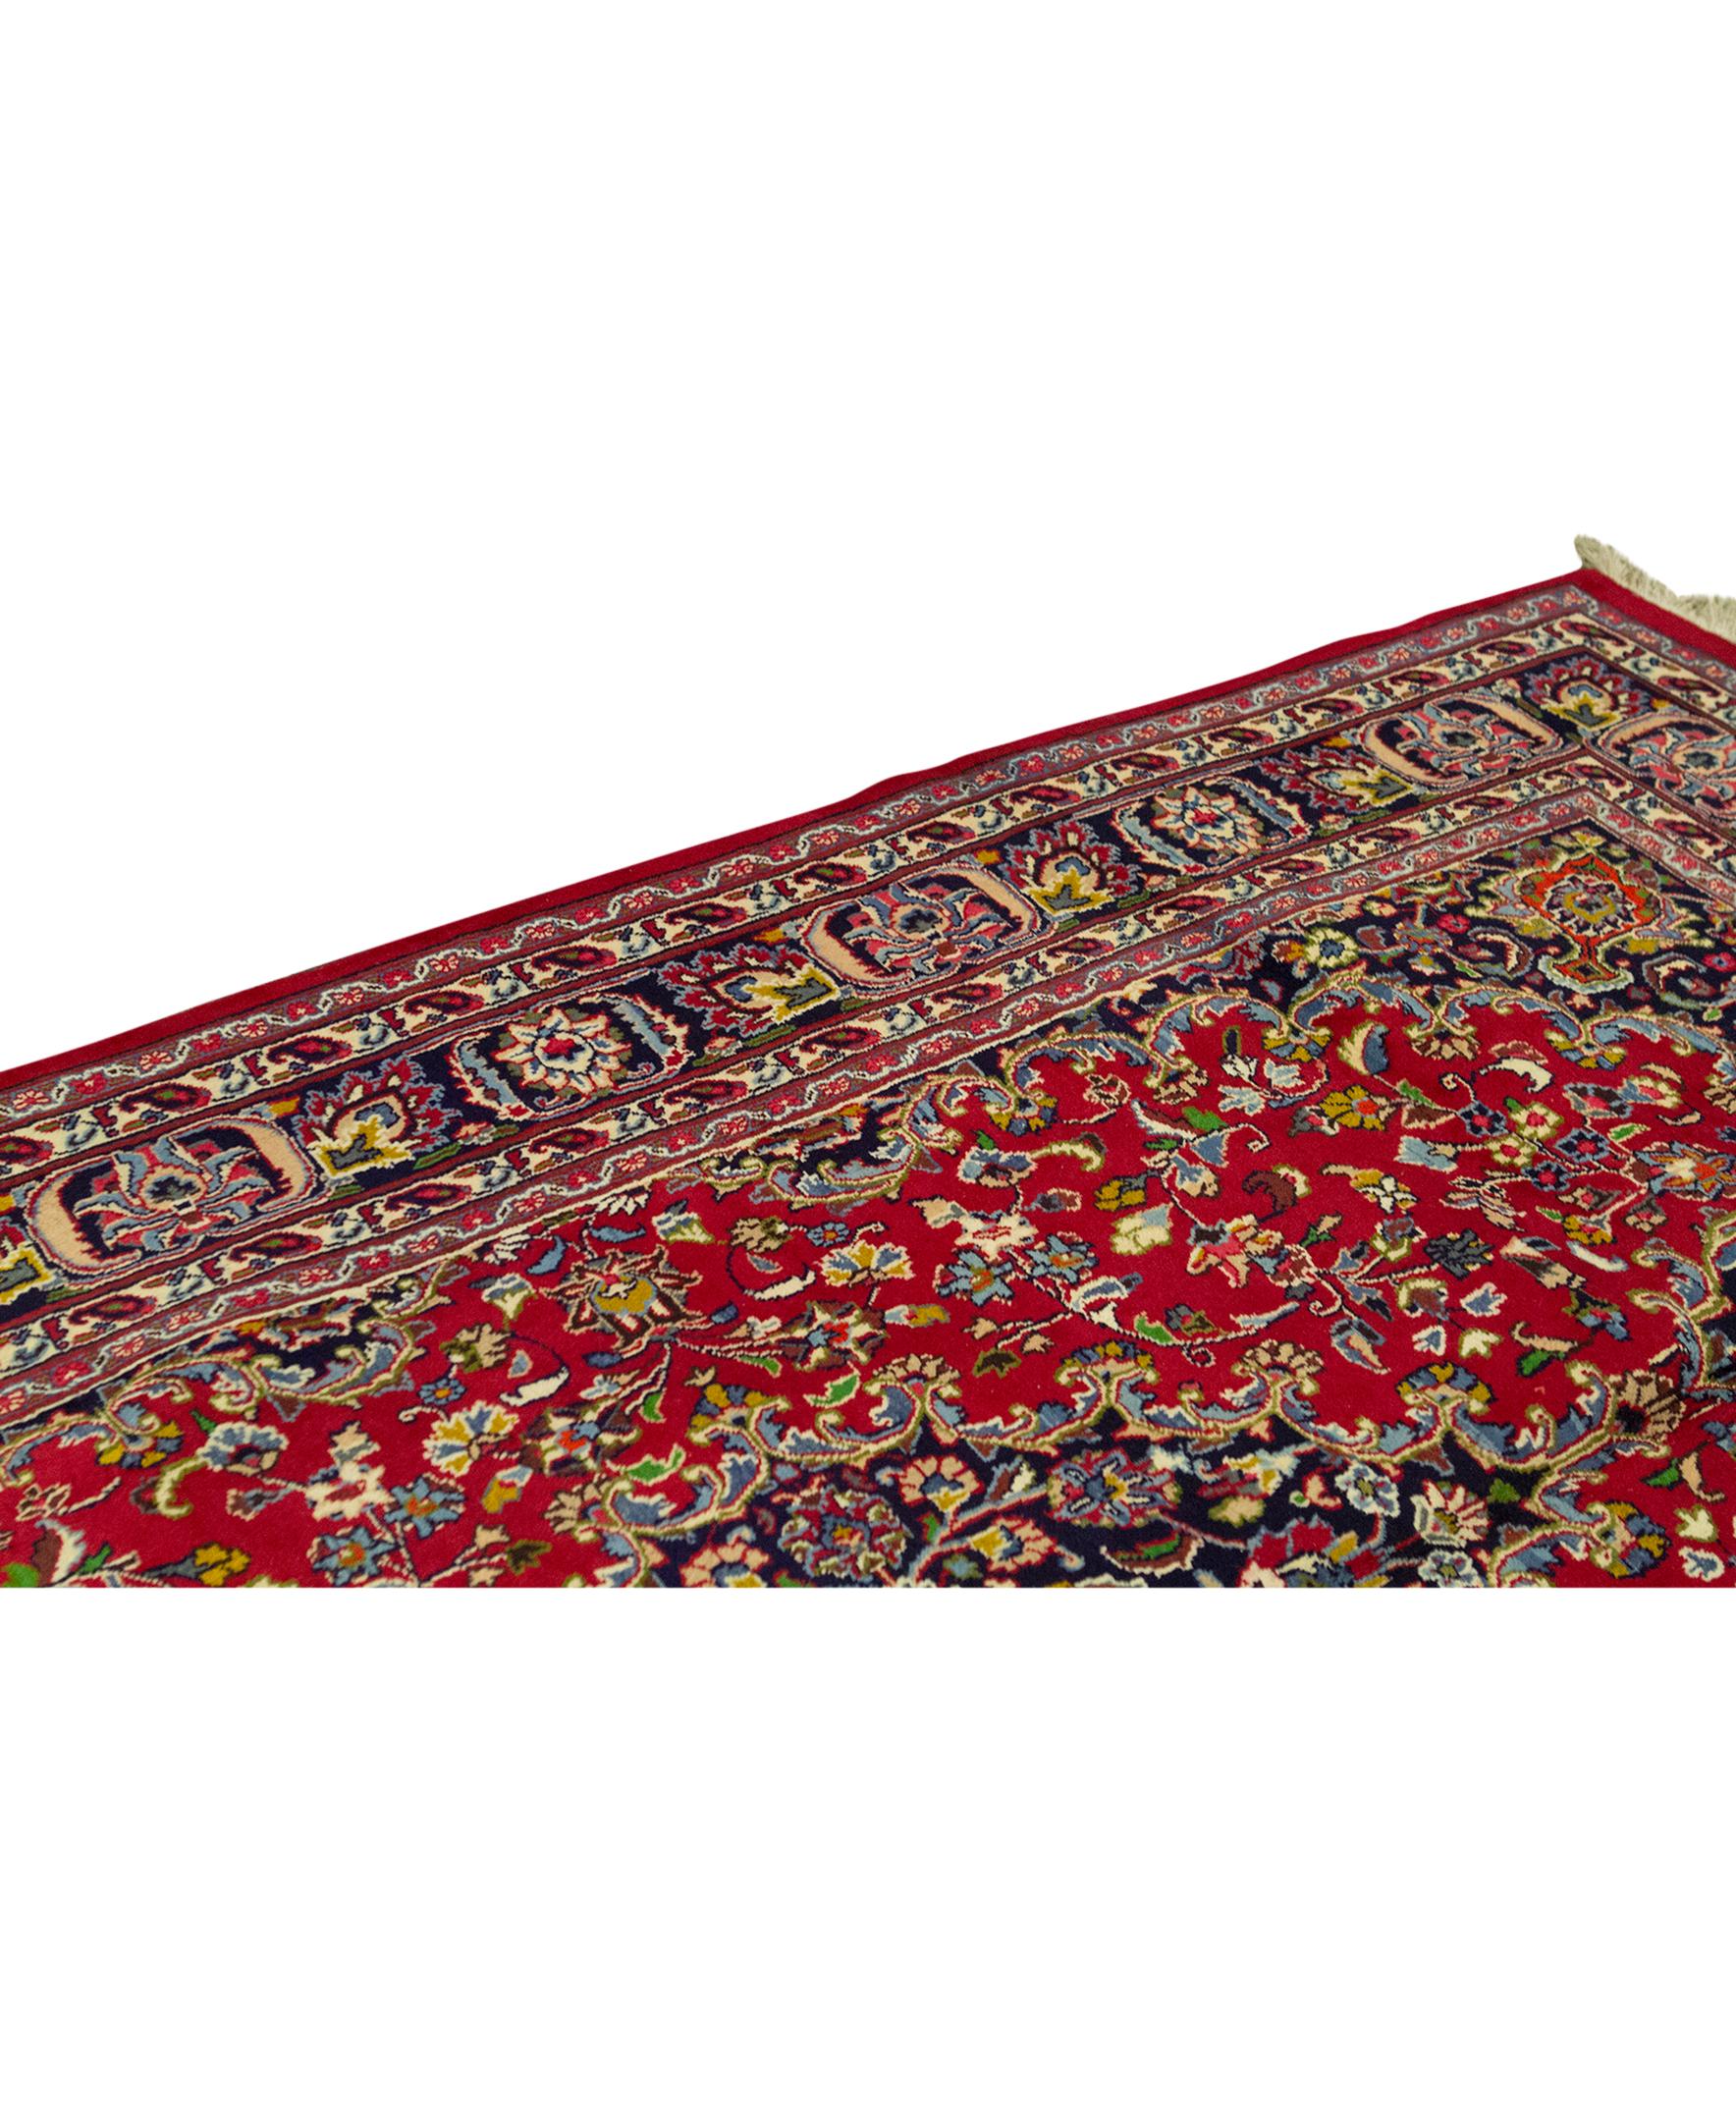   Antique Persian Fine Traditional Handwoven Luxury Wool Red Rug. Size: 6'-10